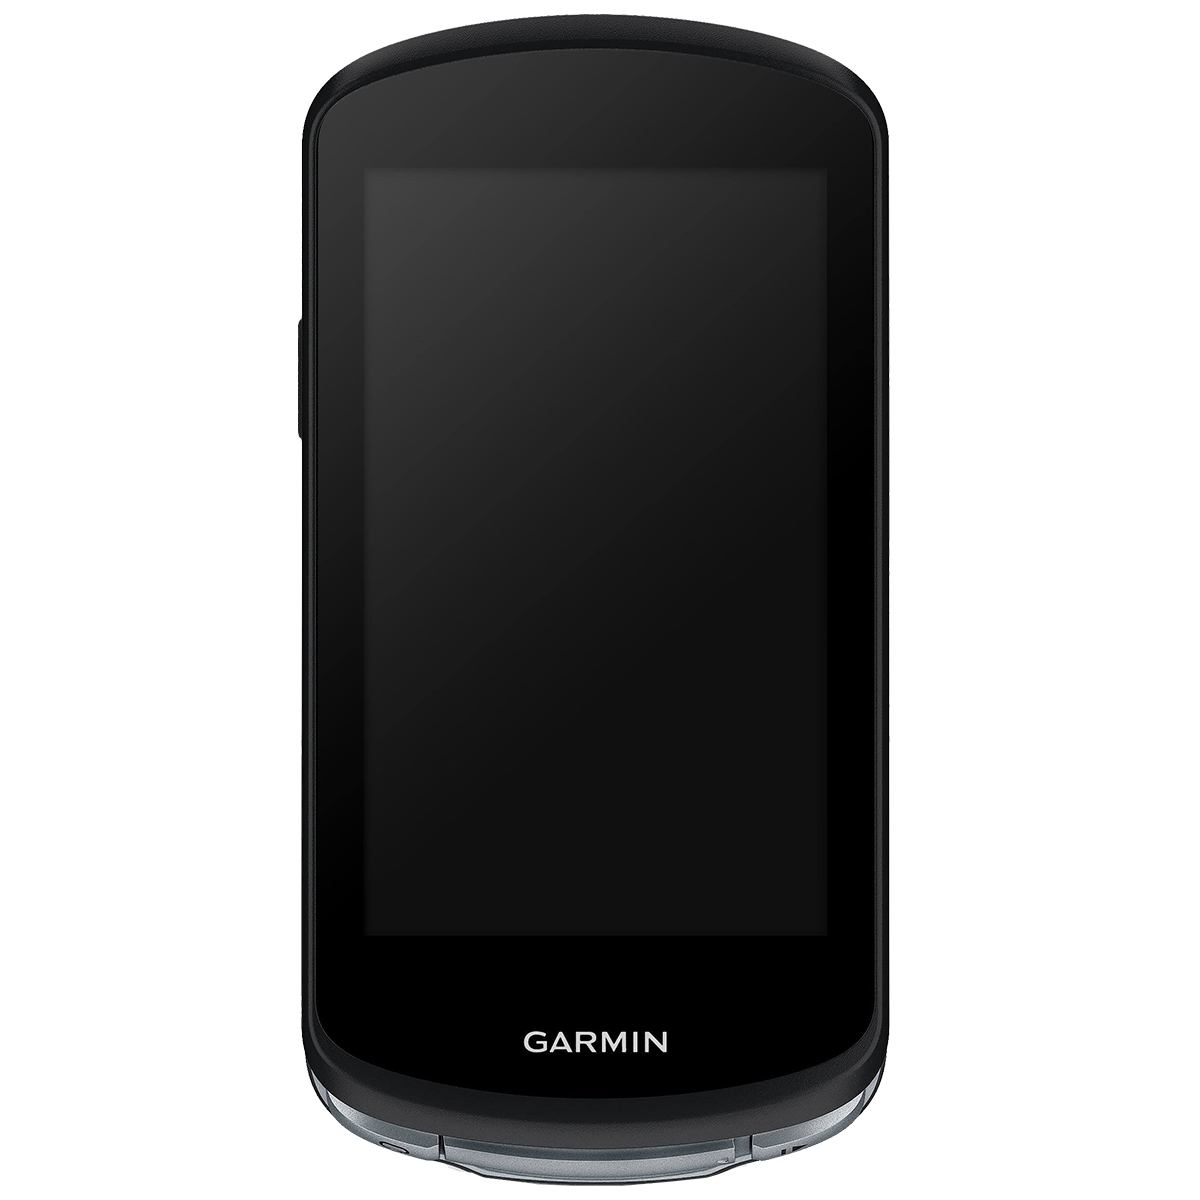 Garmin Edge 1040 Solar Claims up to 100 Hours of Battery Life